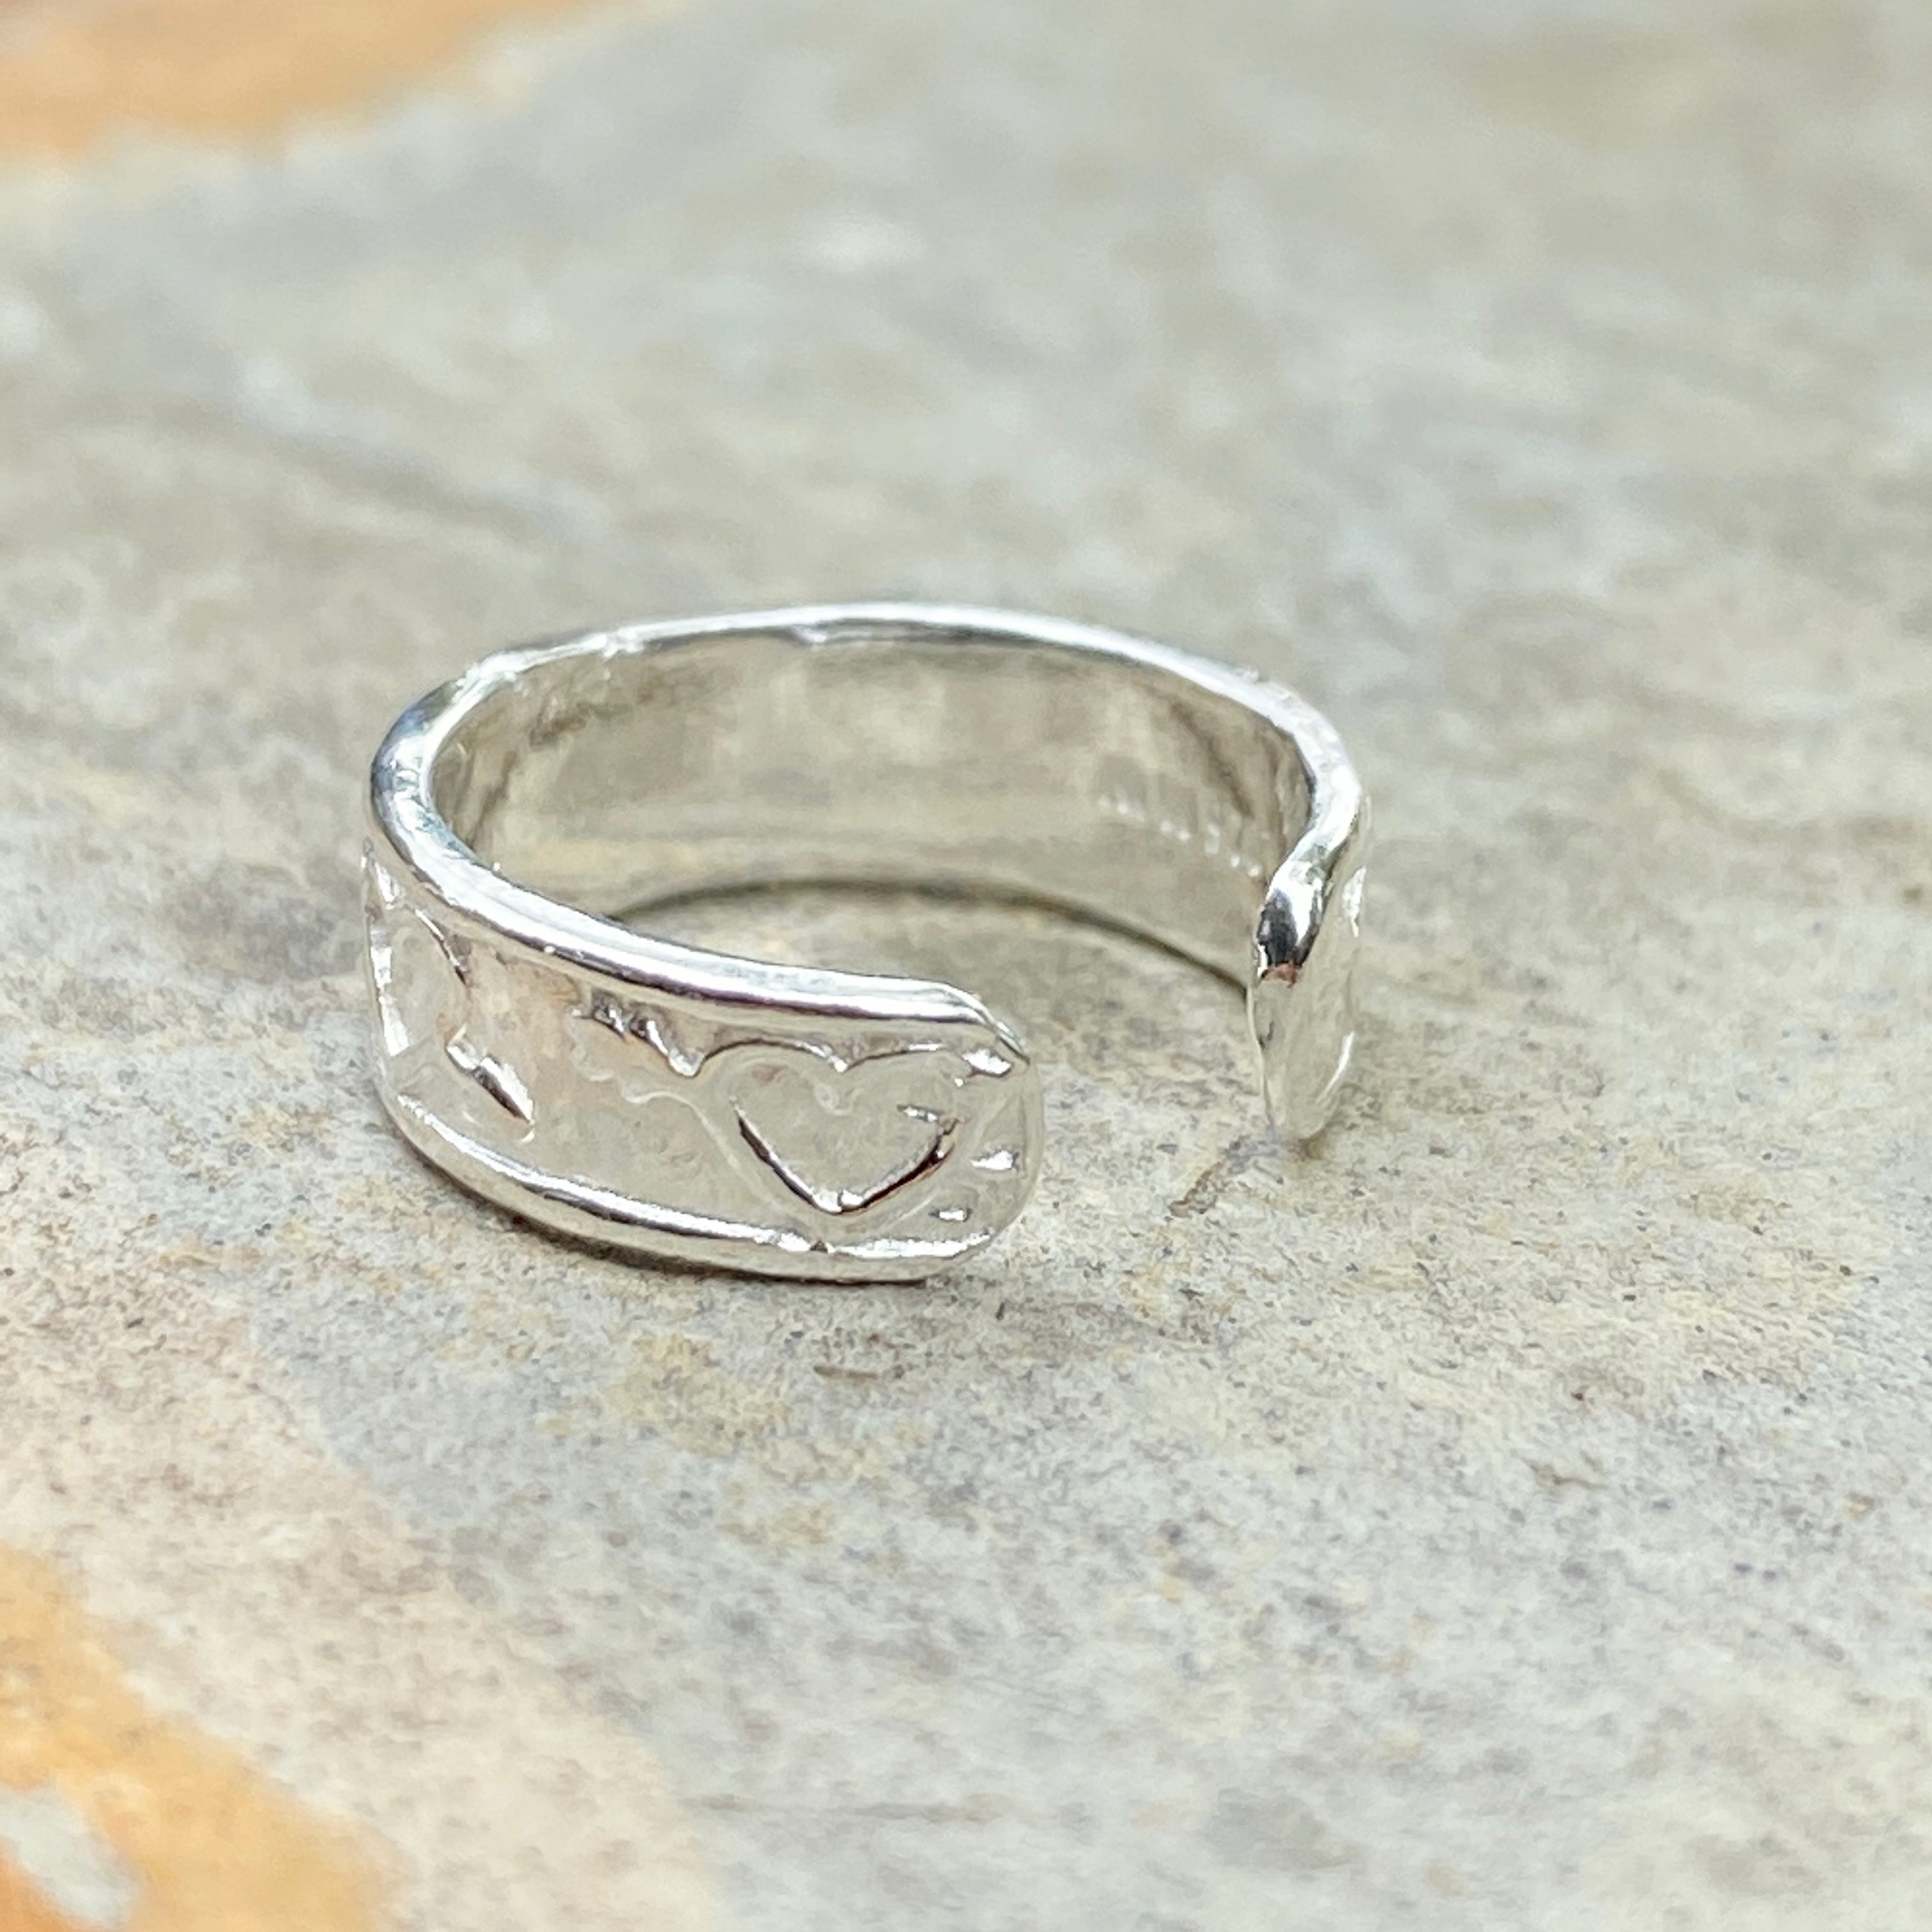 Sterling silver toe ring, adjustable, thick band, cute design, gift for  women